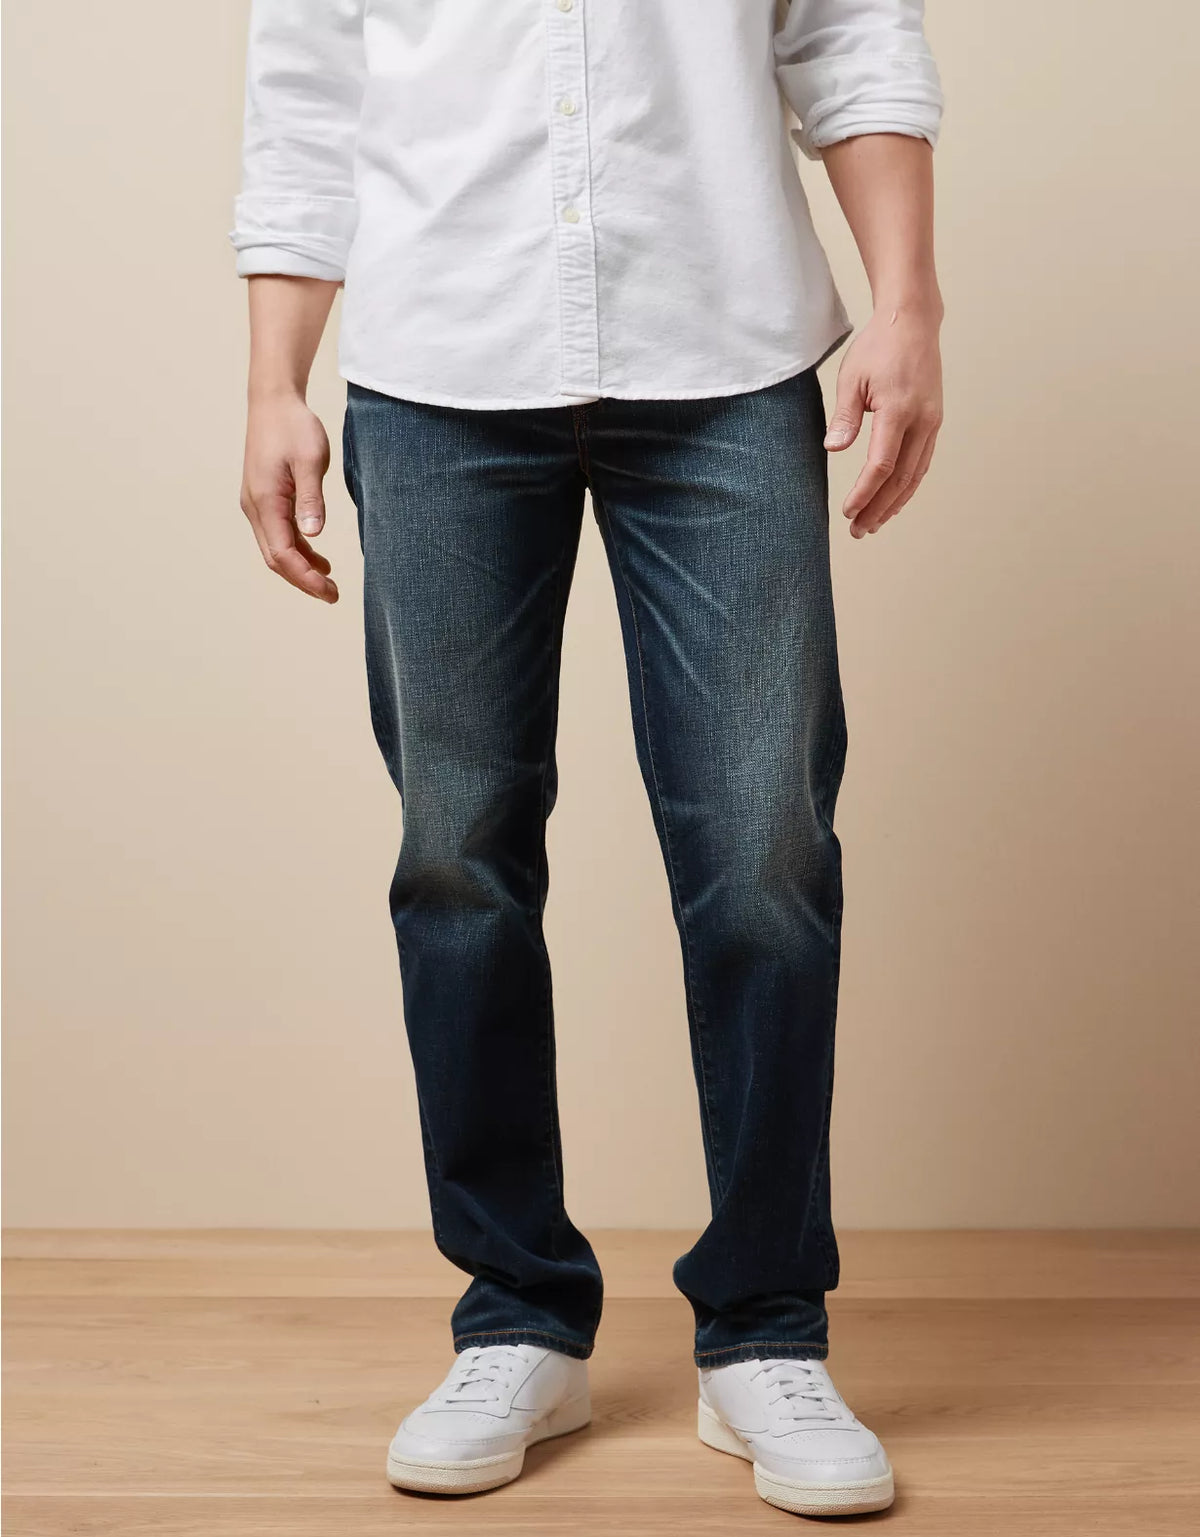 Original Straight Jeans For Men - Stylish Men's Jeans - Available In Blue - AceCart